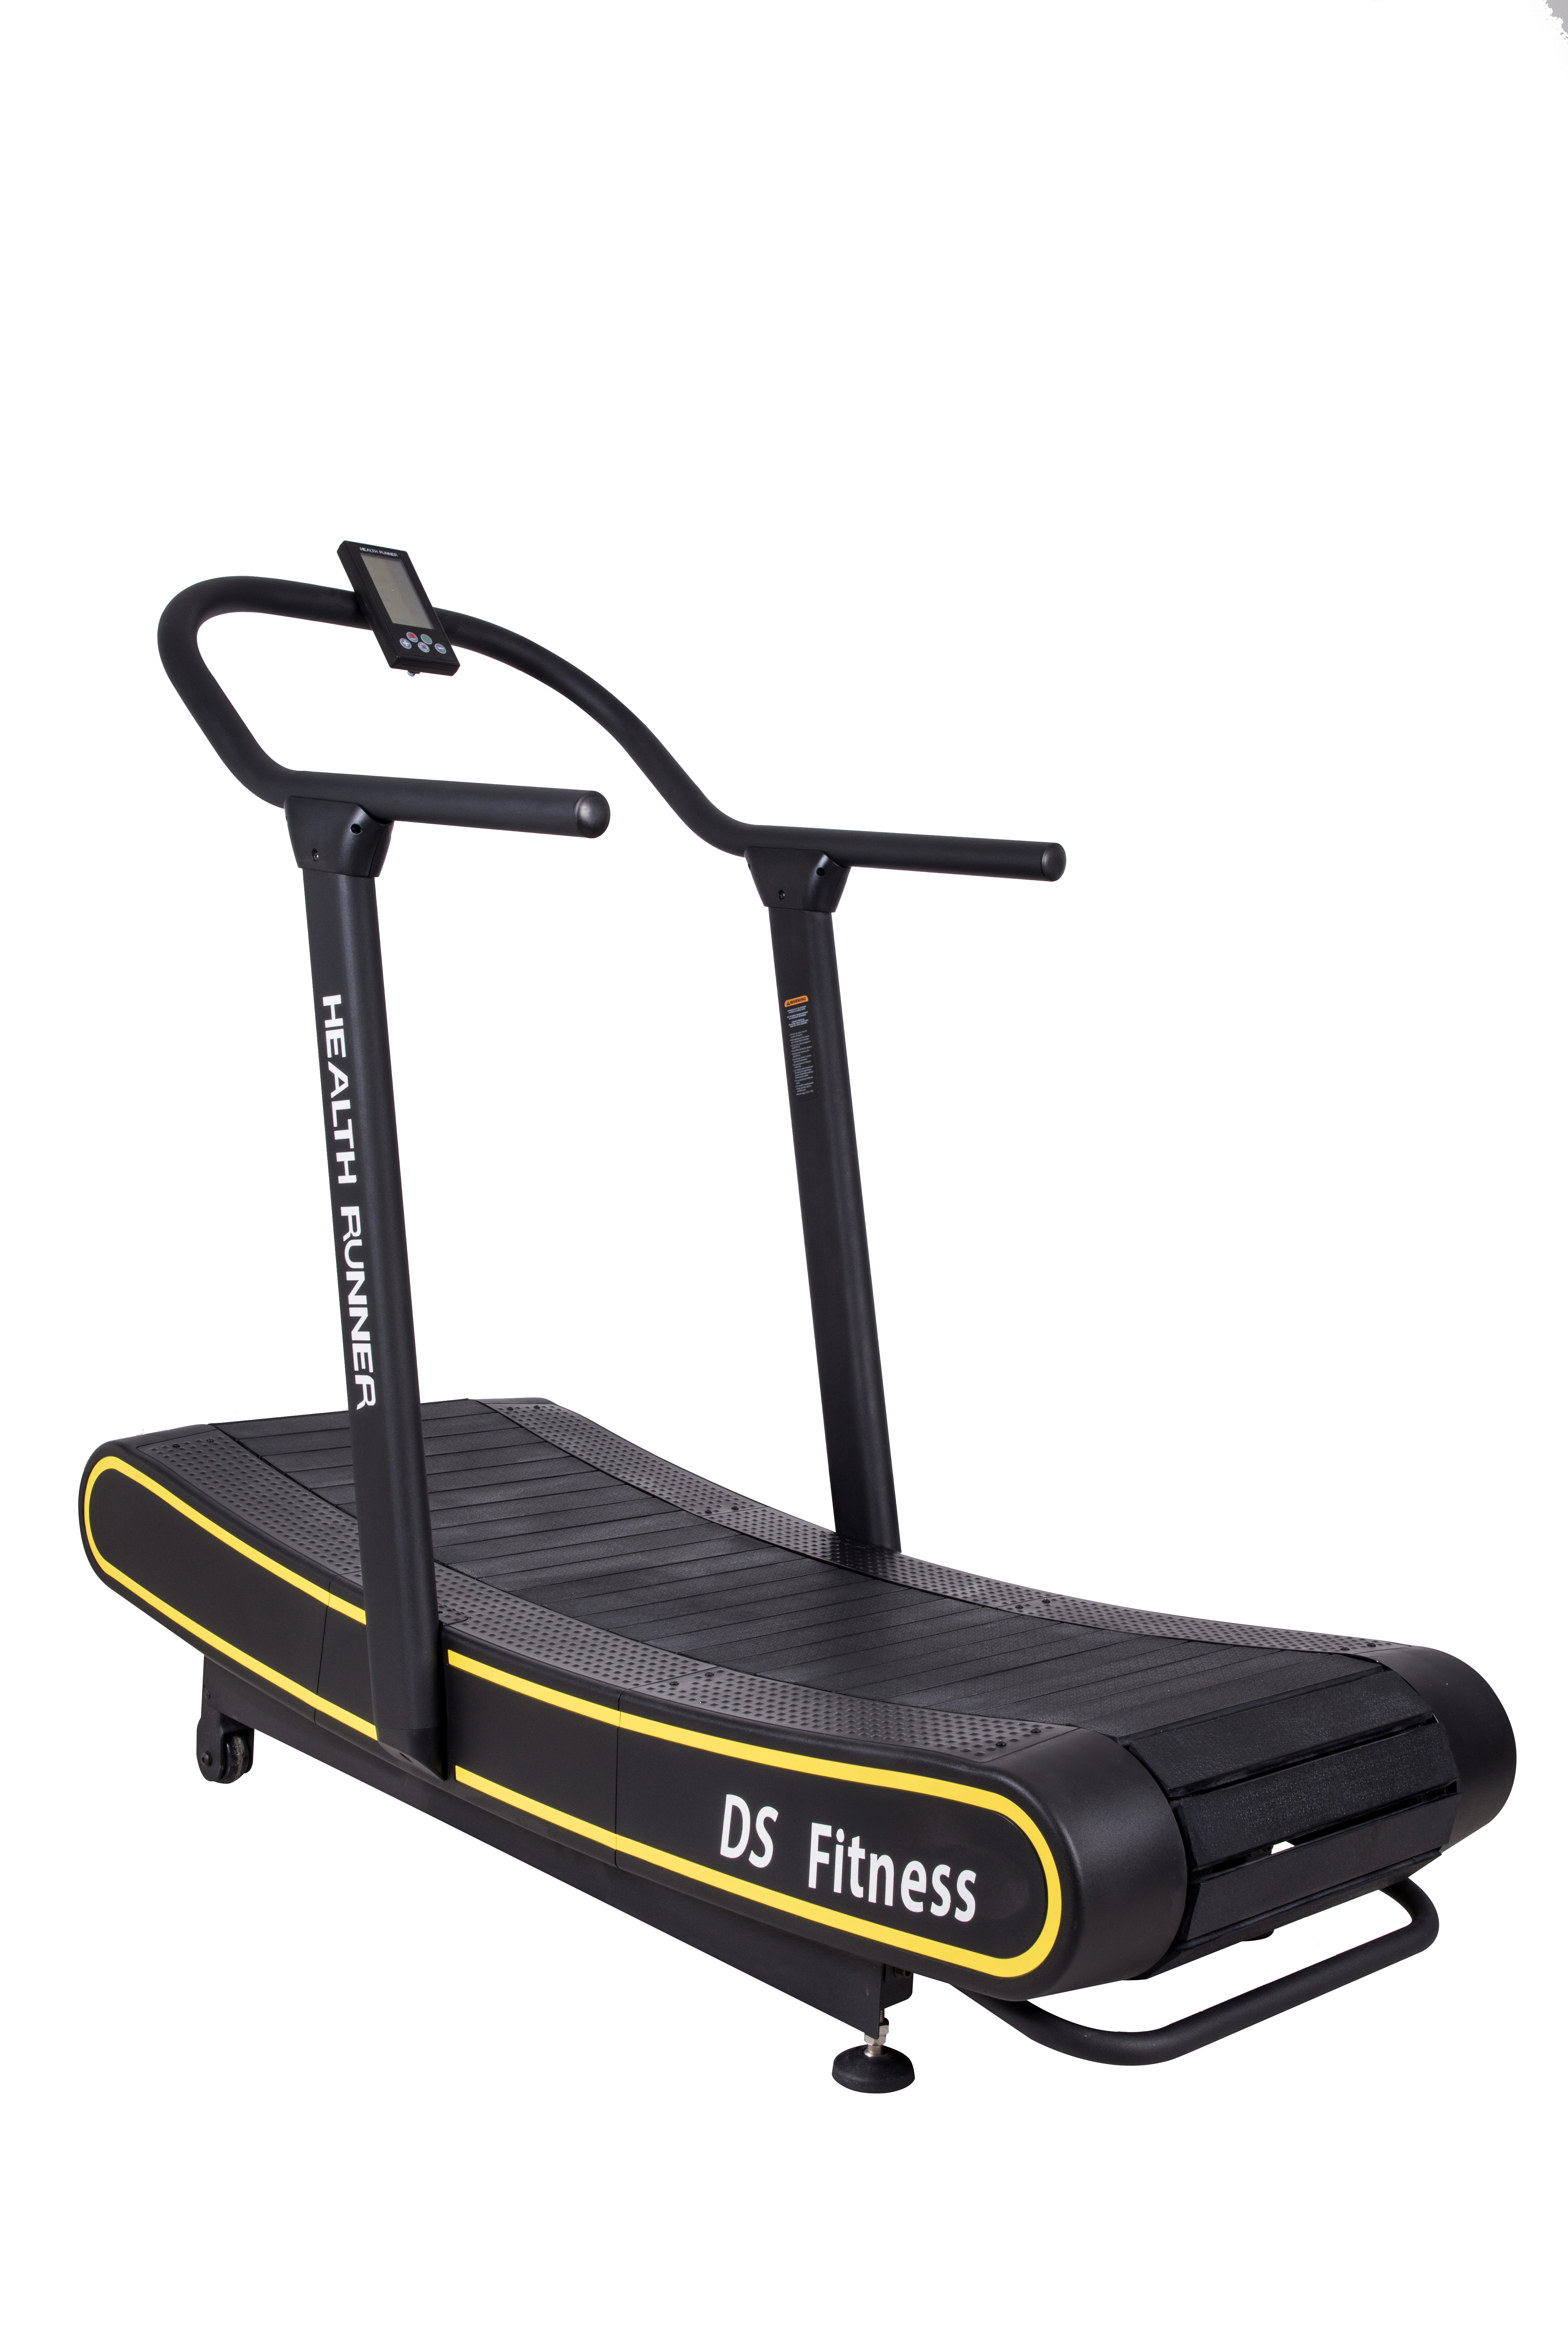 Motorless Quiet Gymnasium Commercial Curved Treadmill